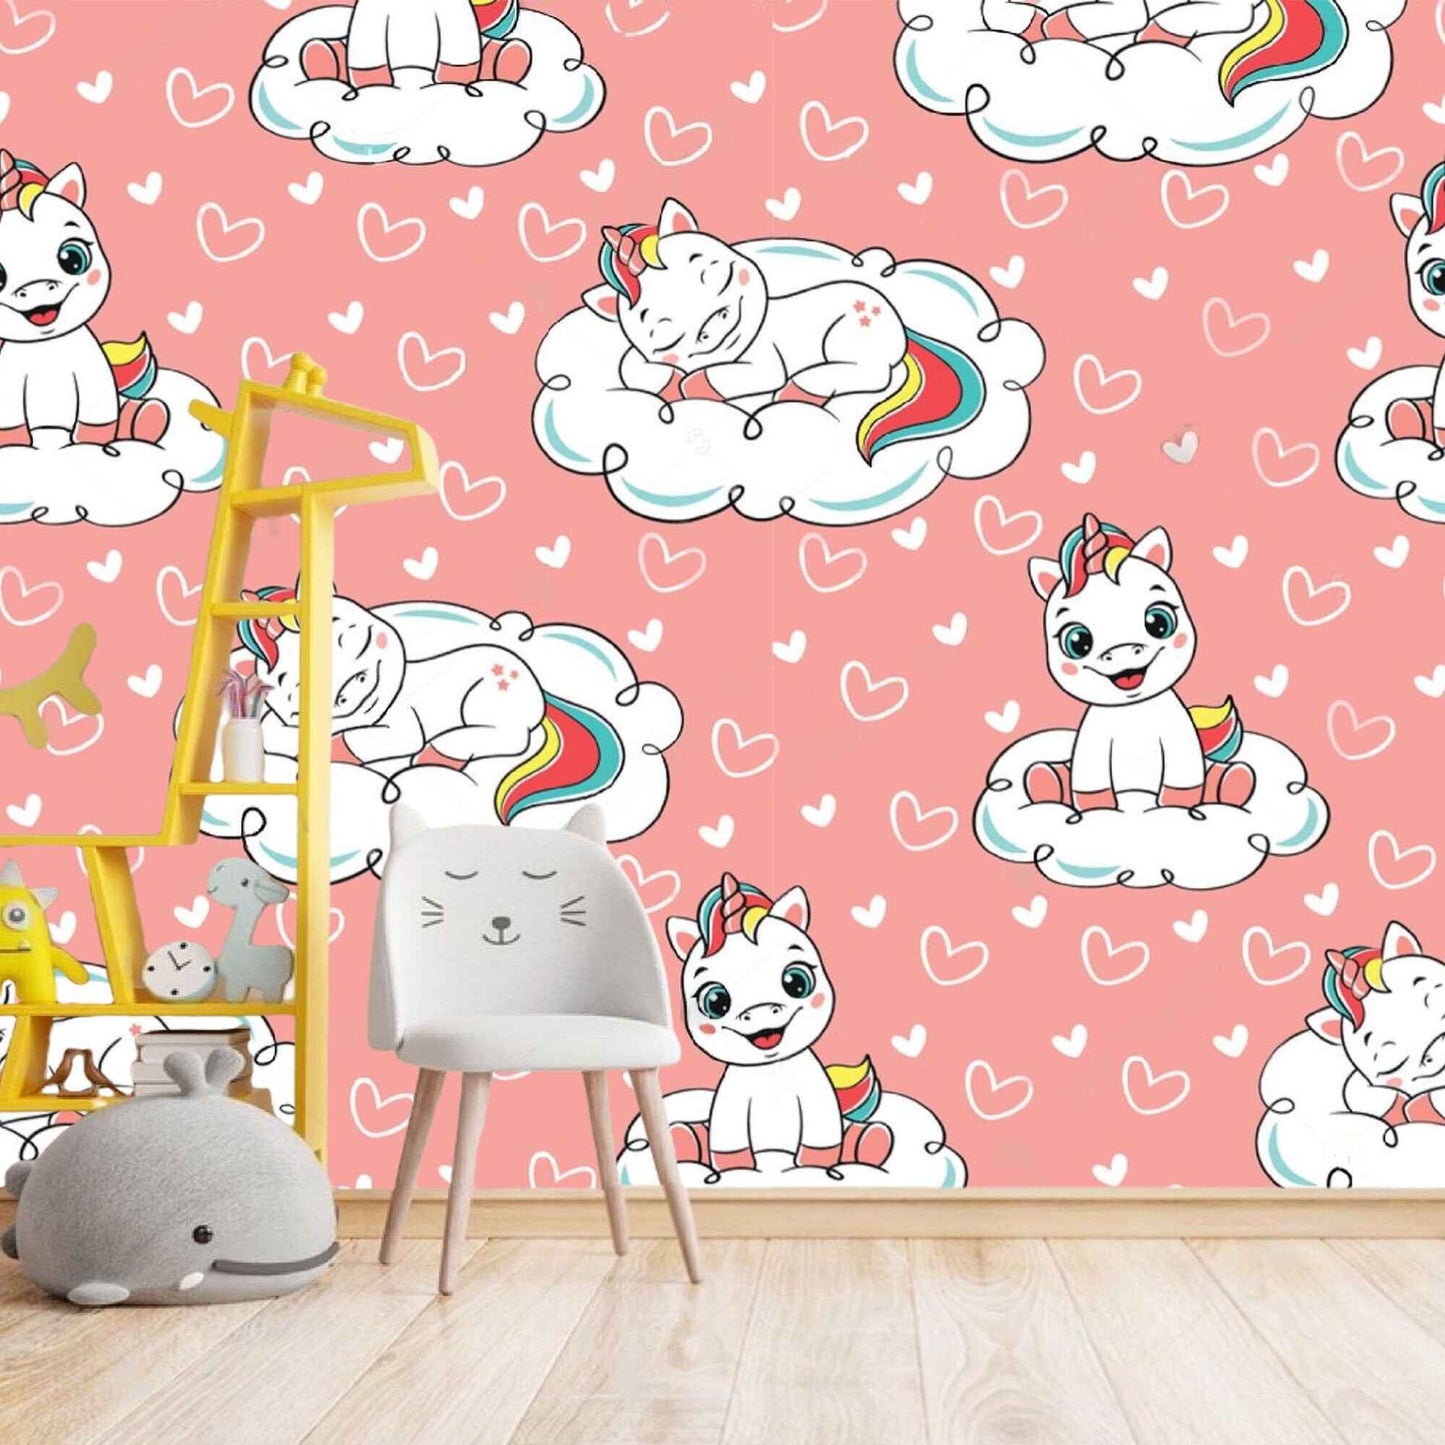 Magical unicorn wallpaper in a baby girl's nursery, creating an enchanting atmosphere.